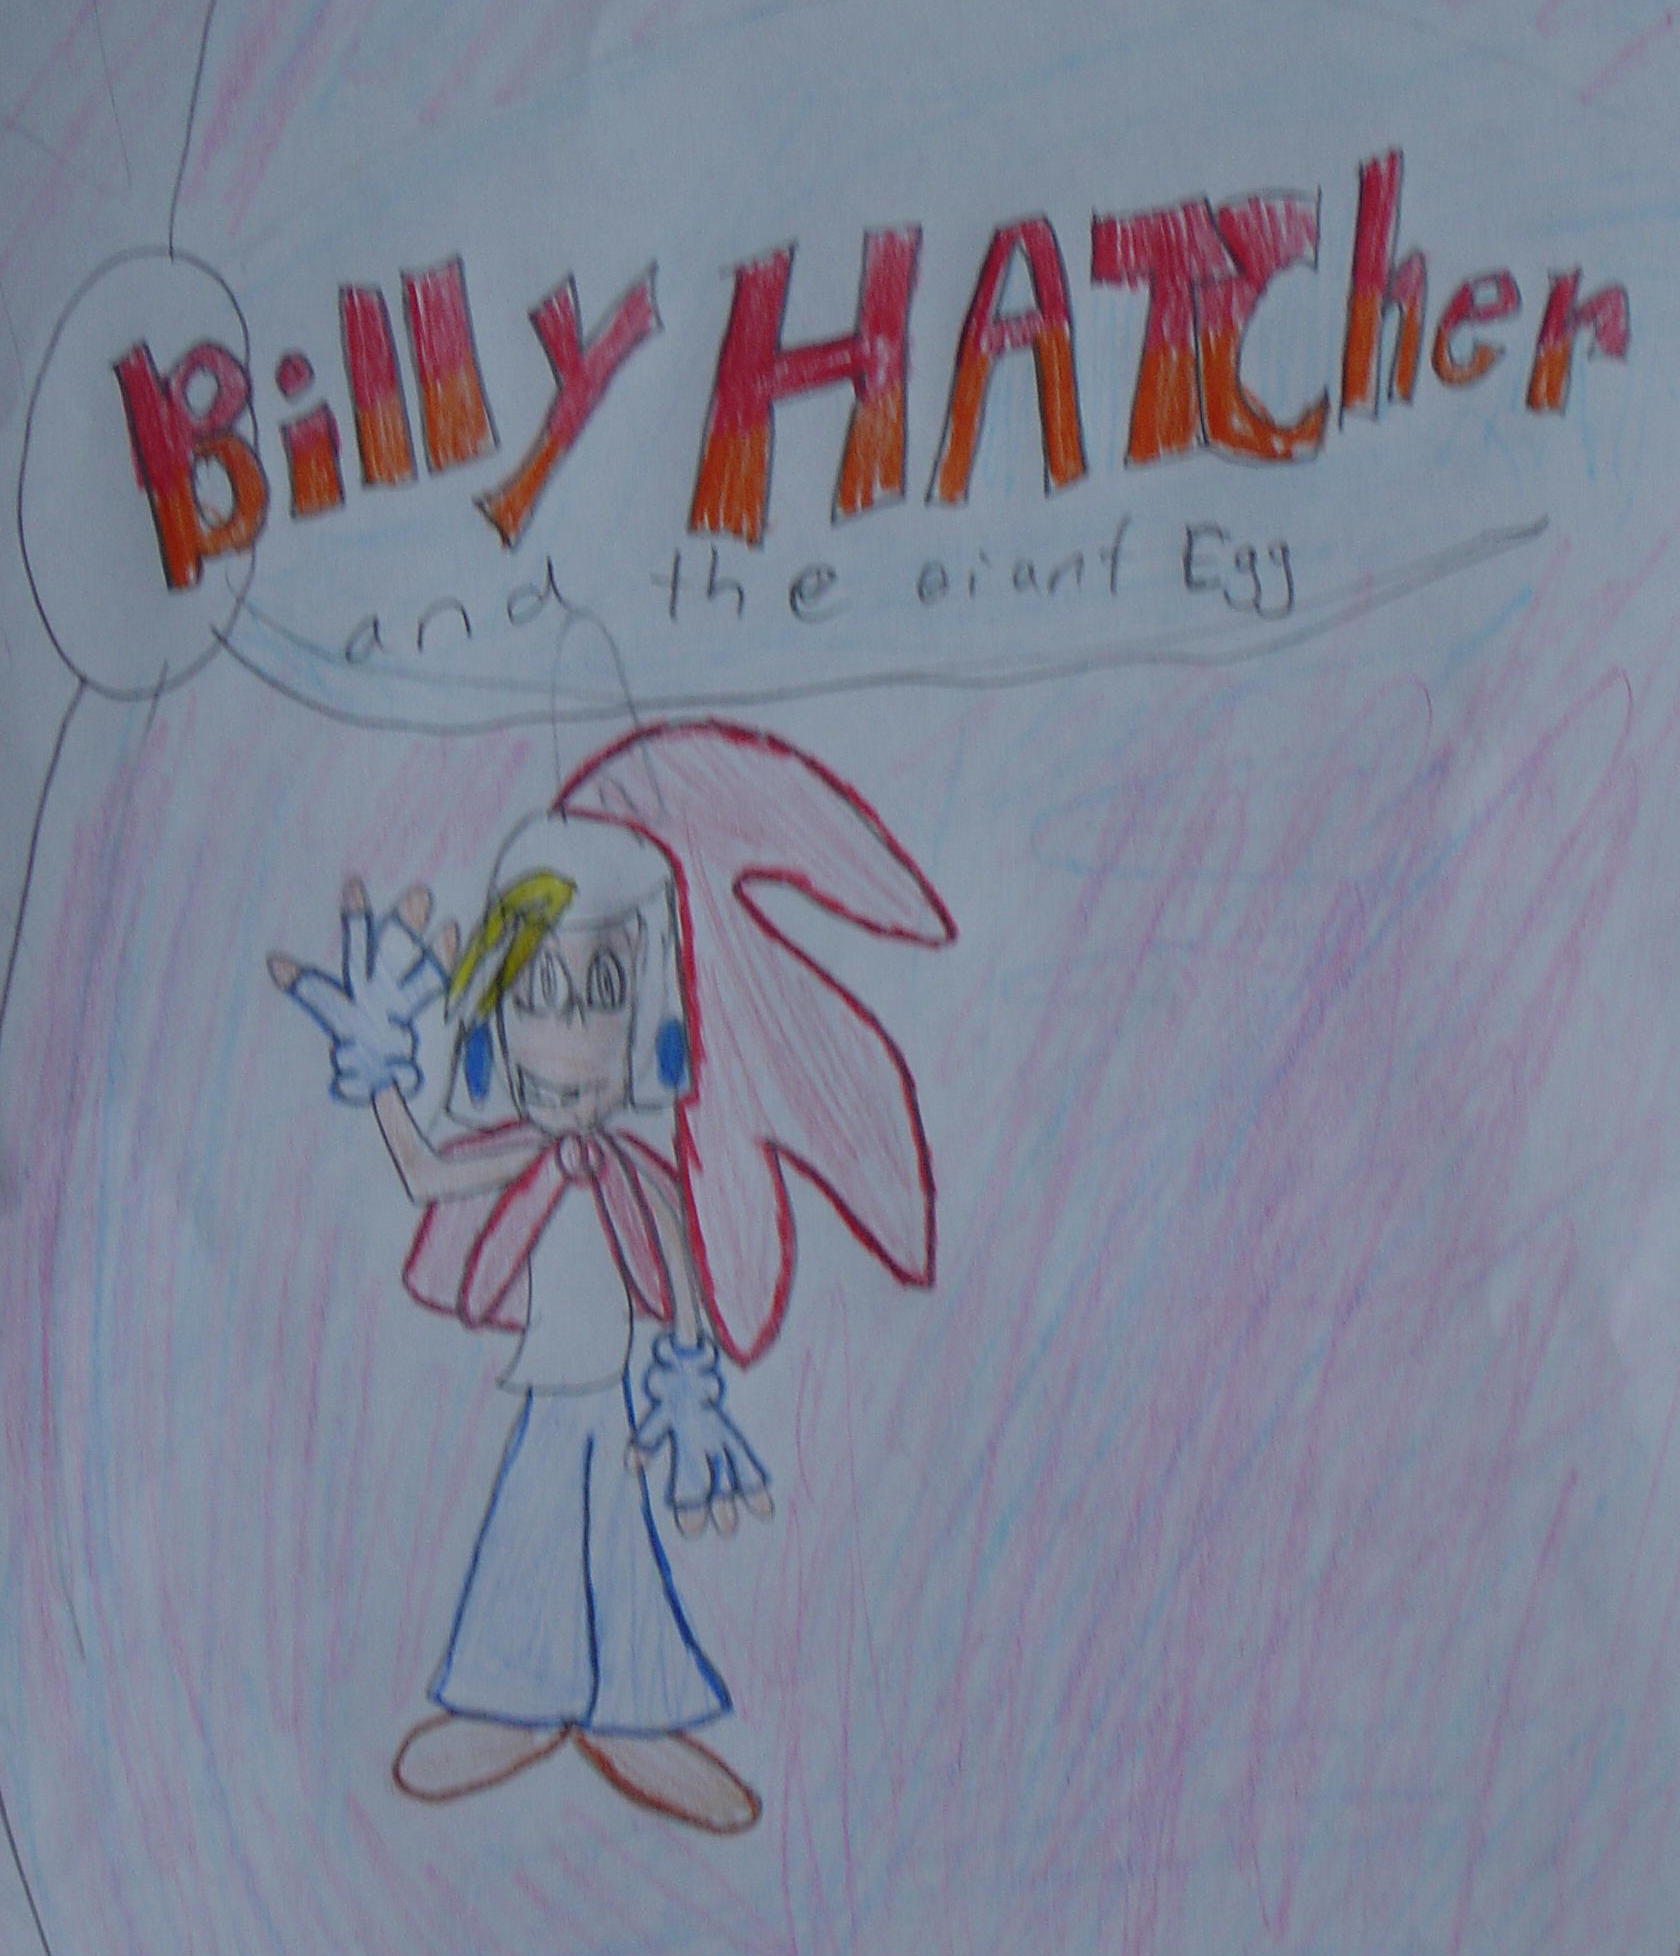 Billy Hatcher and the Giant Egg by CharmyB2